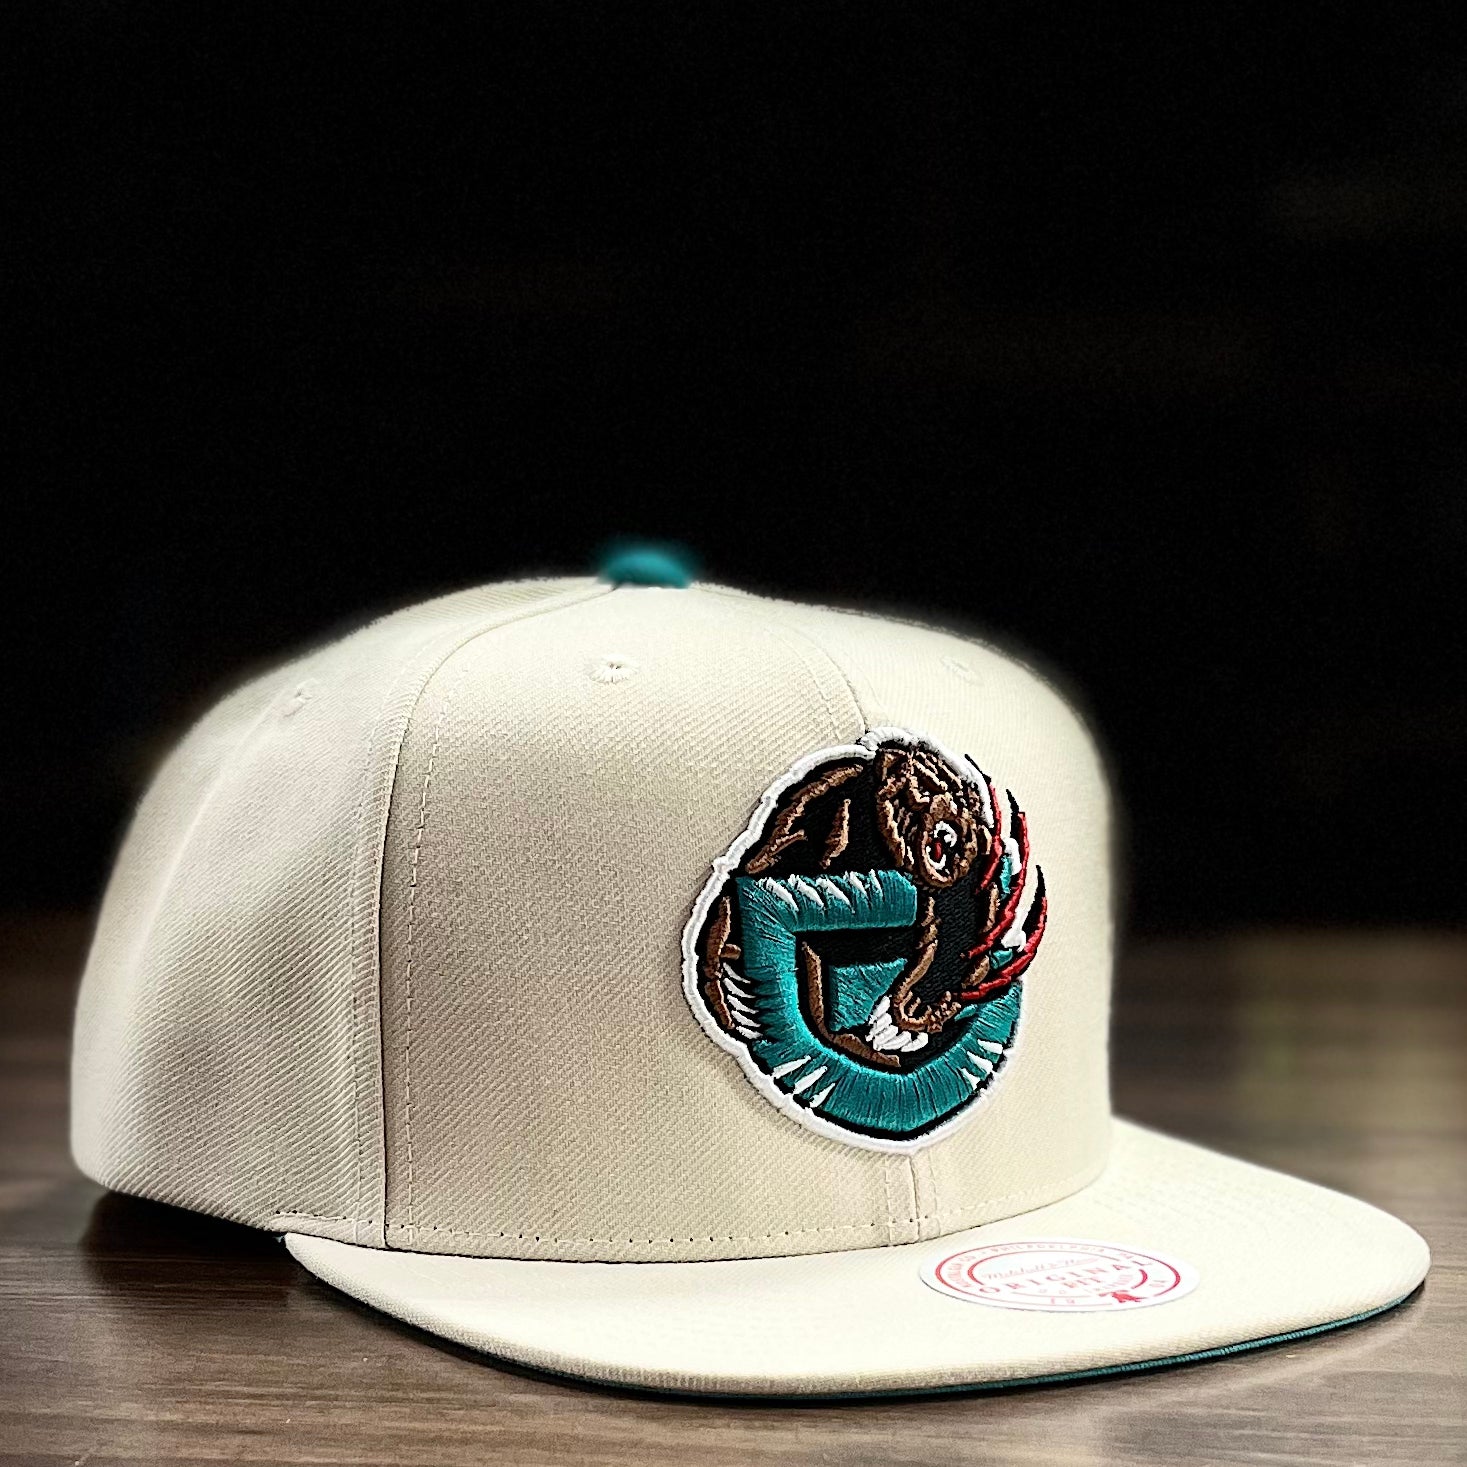 Men's Mitchell & Ness x Lids Olive Vancouver Grizzlies Dusty Hardwood Classics Fitted Hat